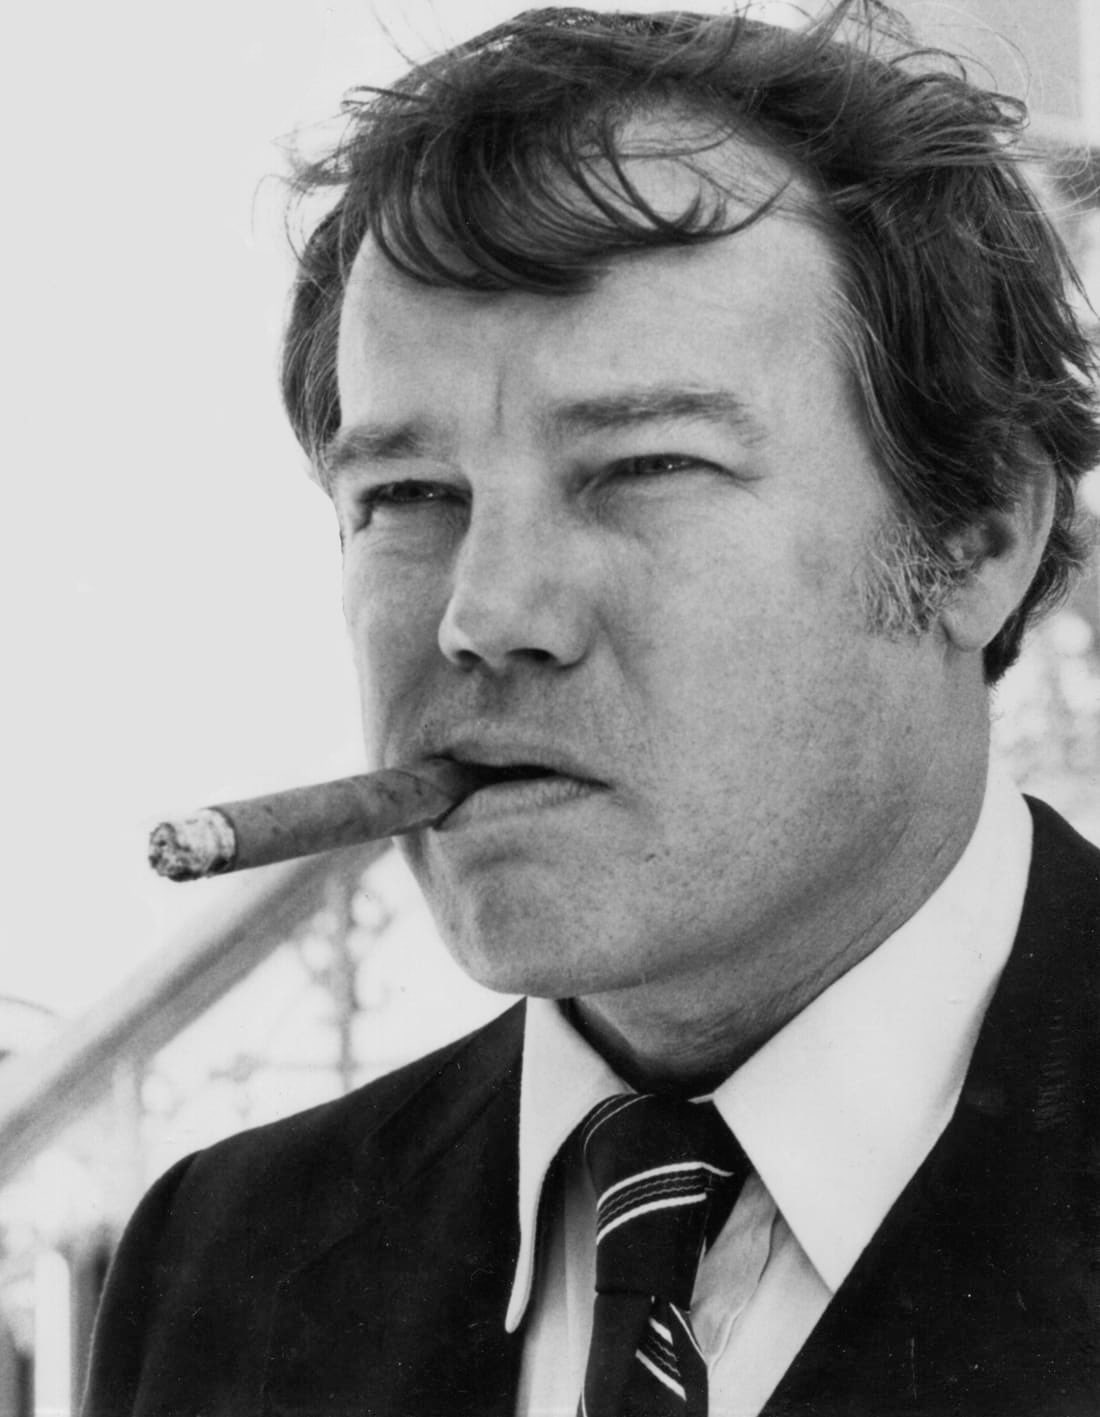 Happy 82nd birthday to one of the best character actors ever, Joe Don Baker. The guy could rock a cigar, too. 